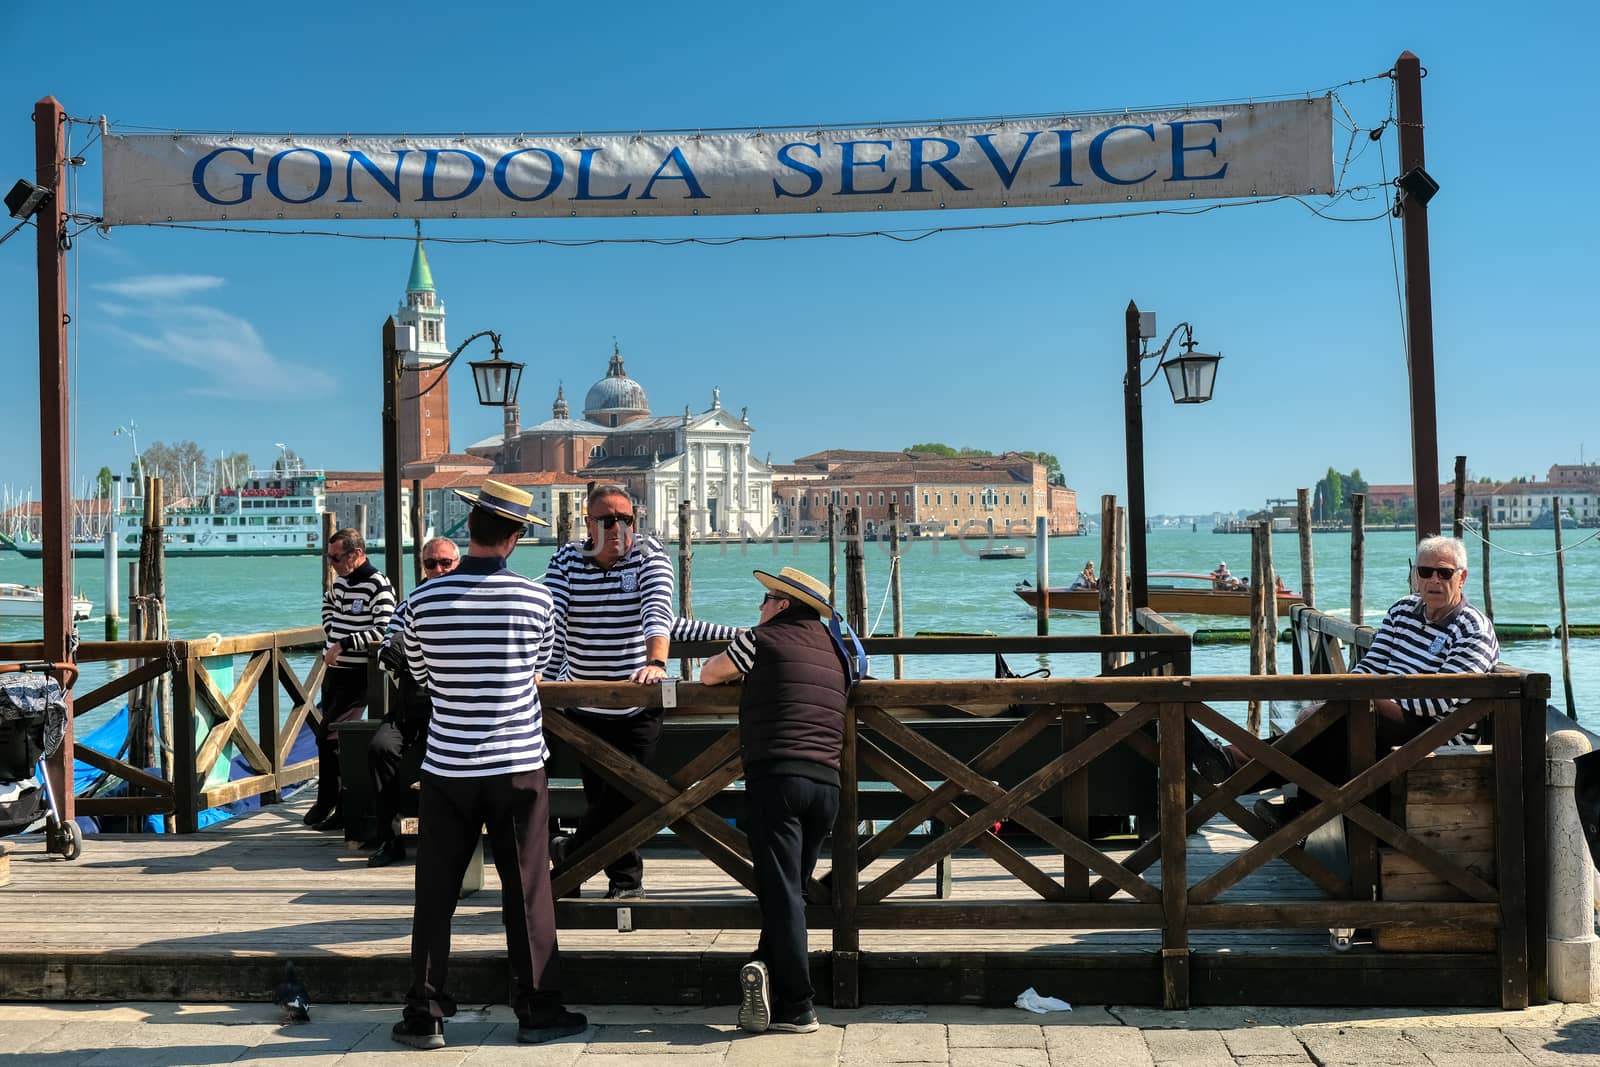 Venice, Italy - April 17 2019: Gondoliers waiting at gondola service for customers at Saint Mark's square in Venice with San Georgio Maggiore church in background